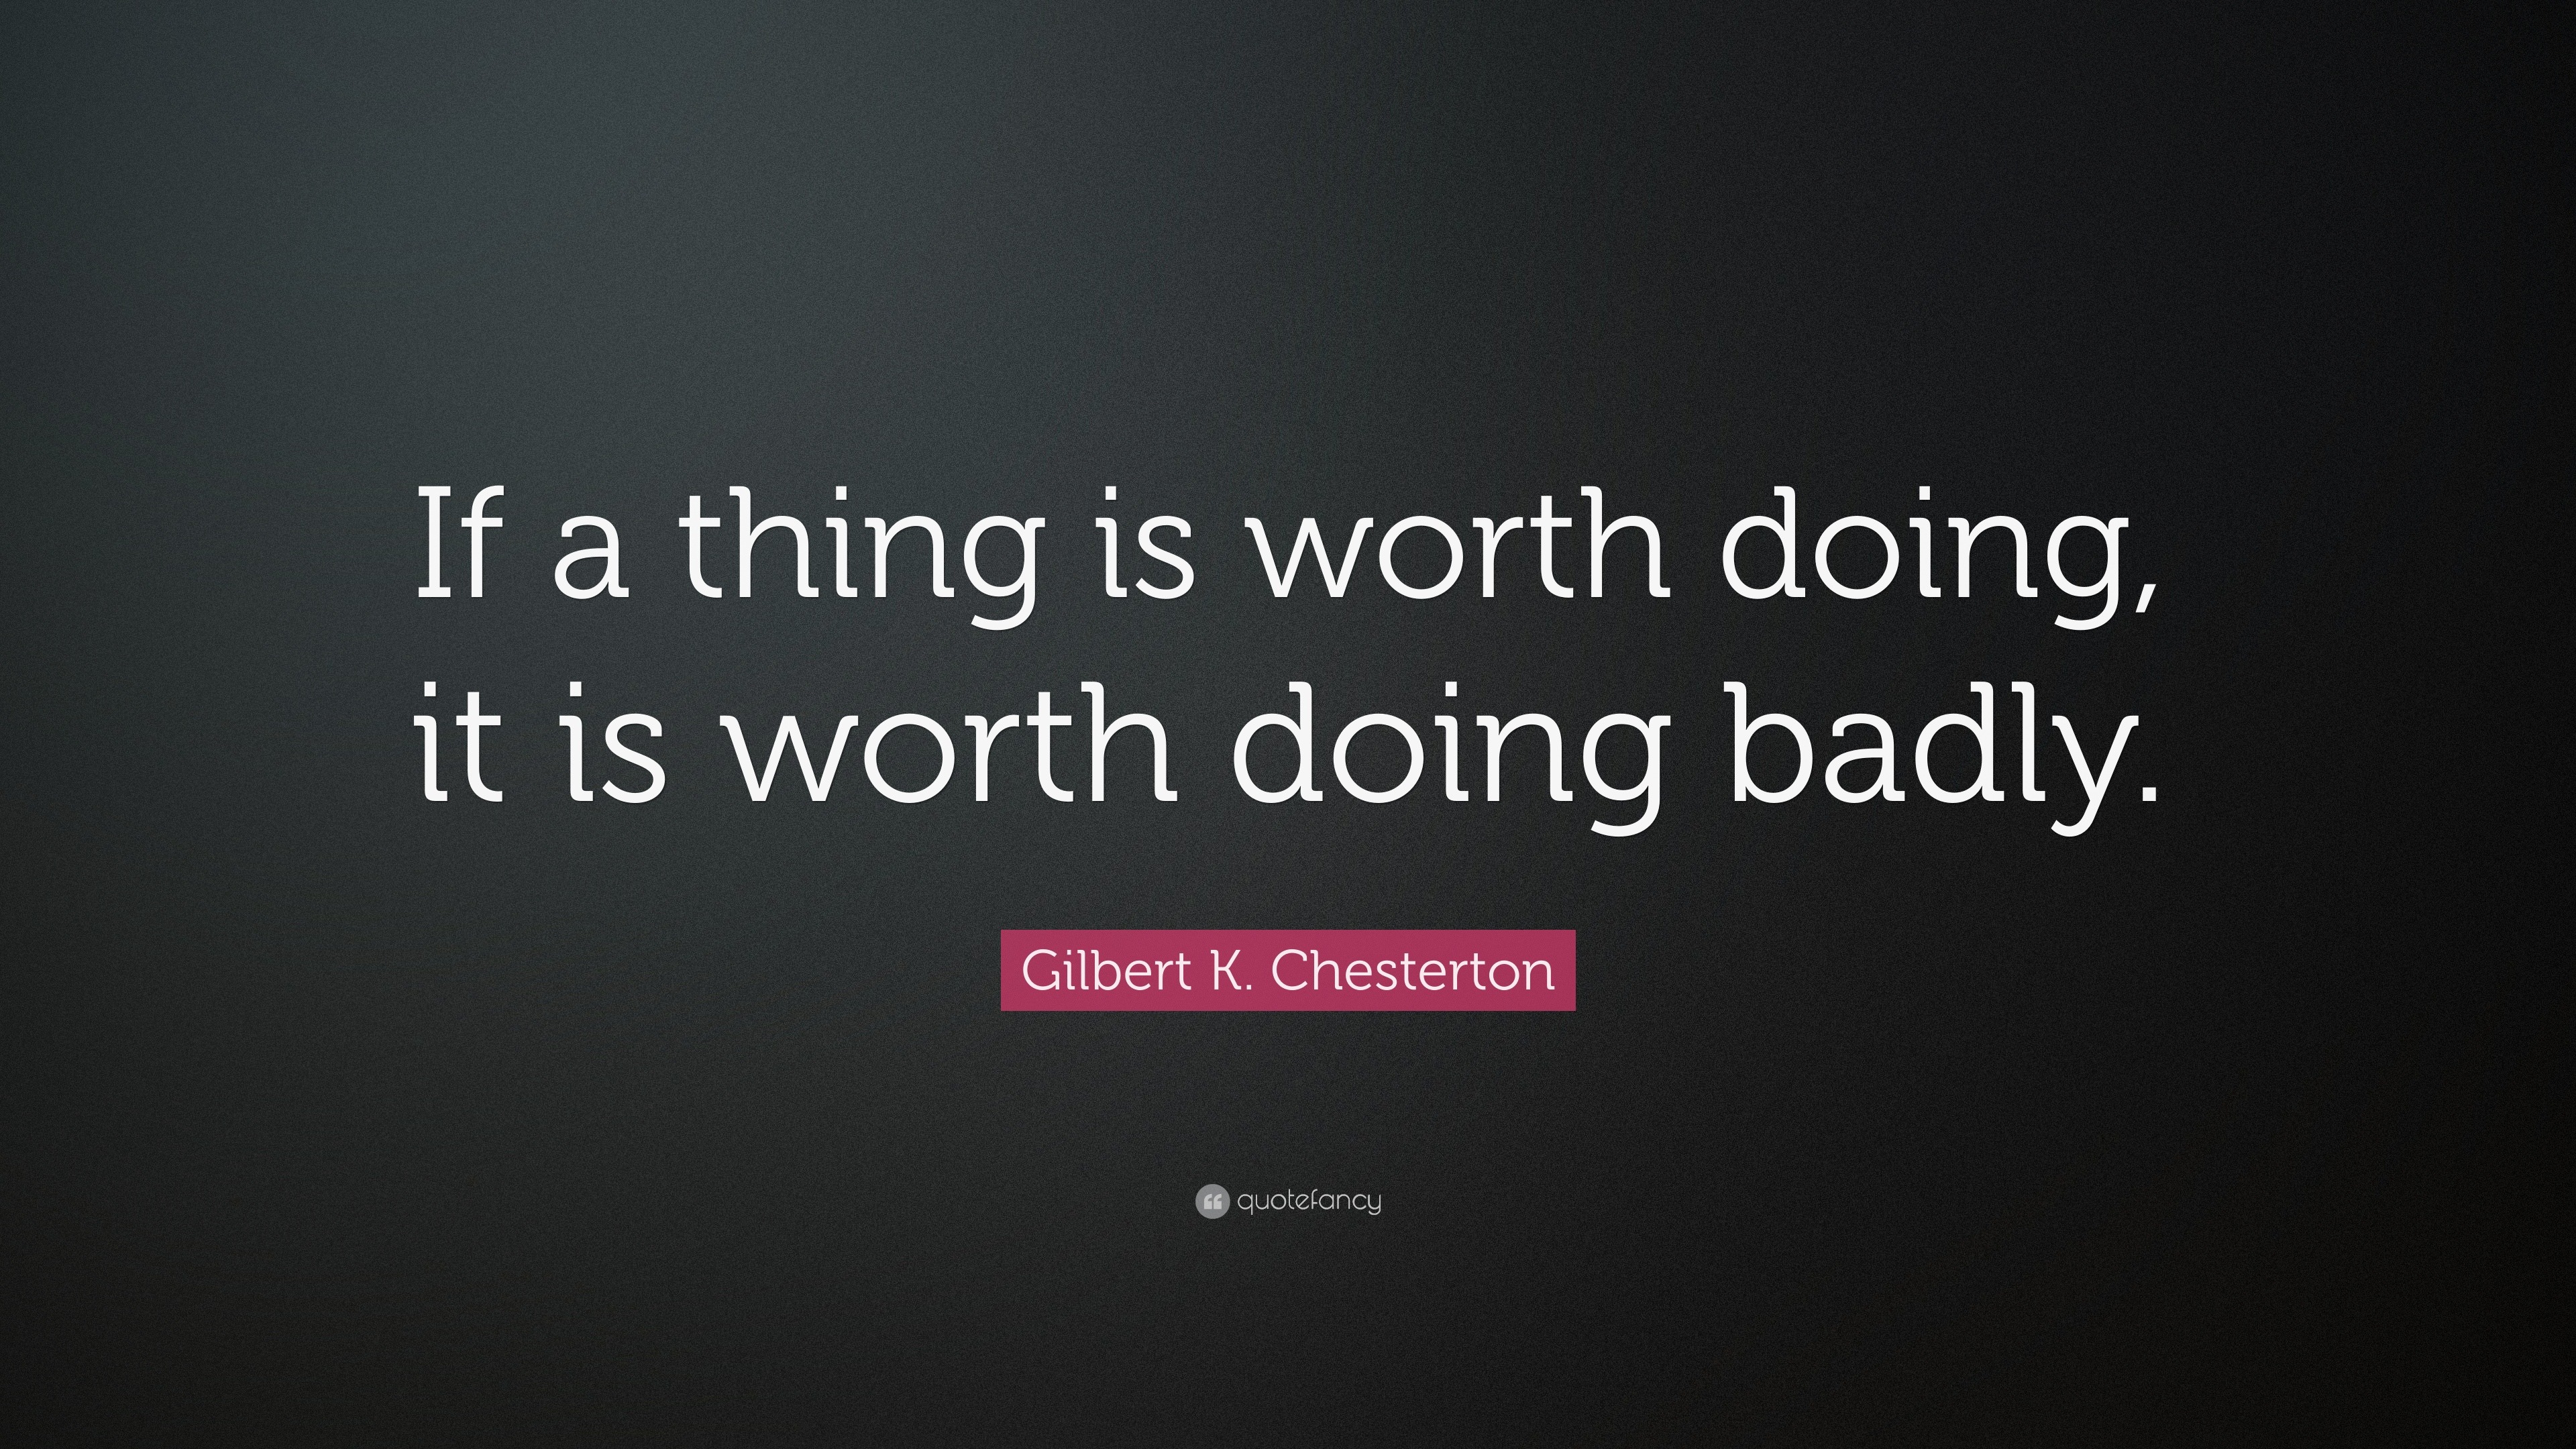 It s well worth. Is Worth it. Worth doing. Be Worth. Worth doing something.